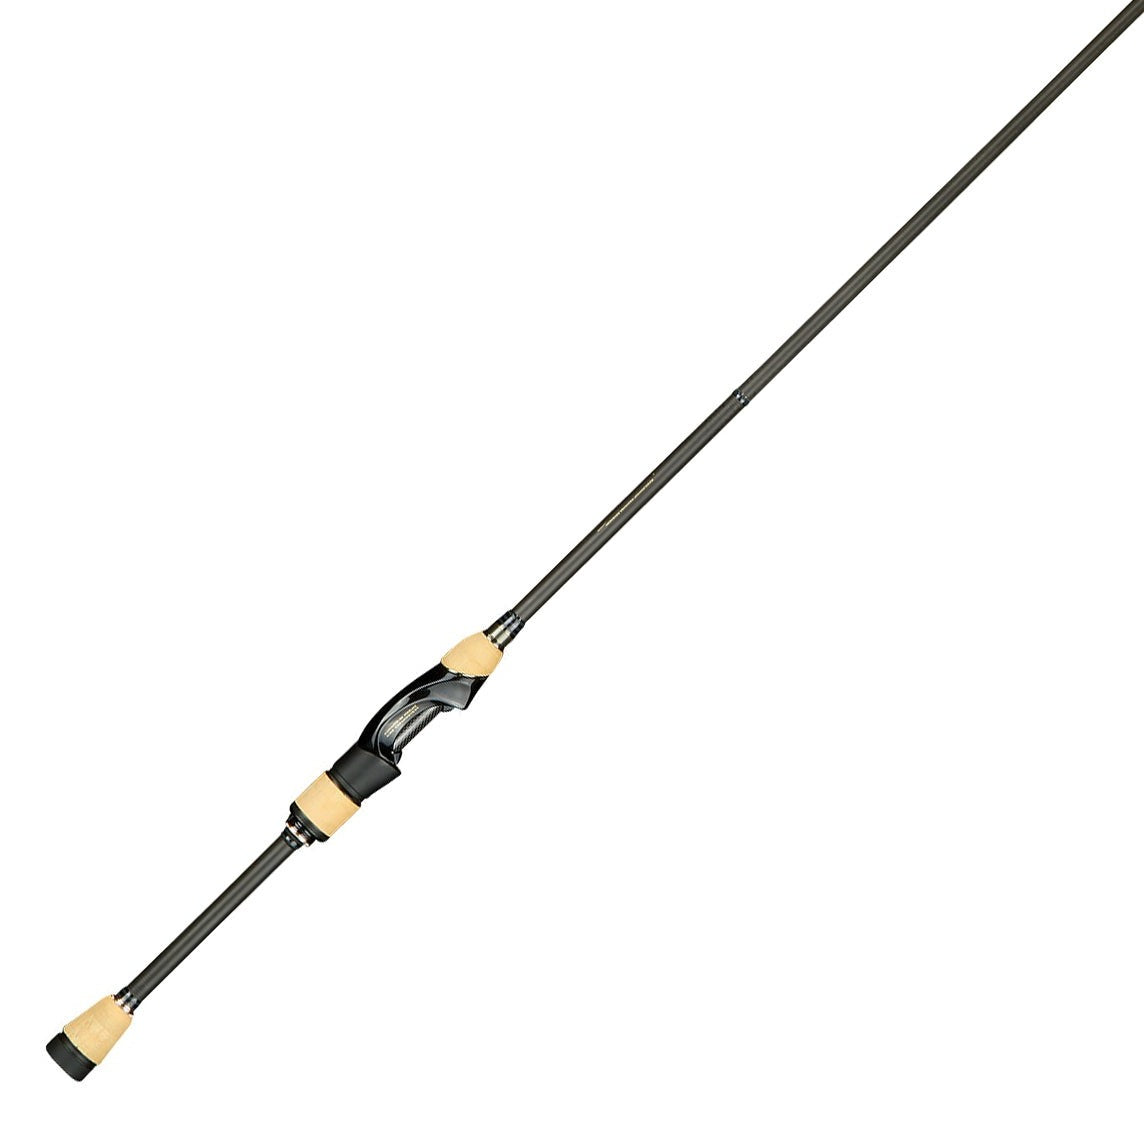 Megabass Destroyer P5 Baby Plugging 7'2 Spinning Rod | F1.1/2-72XS